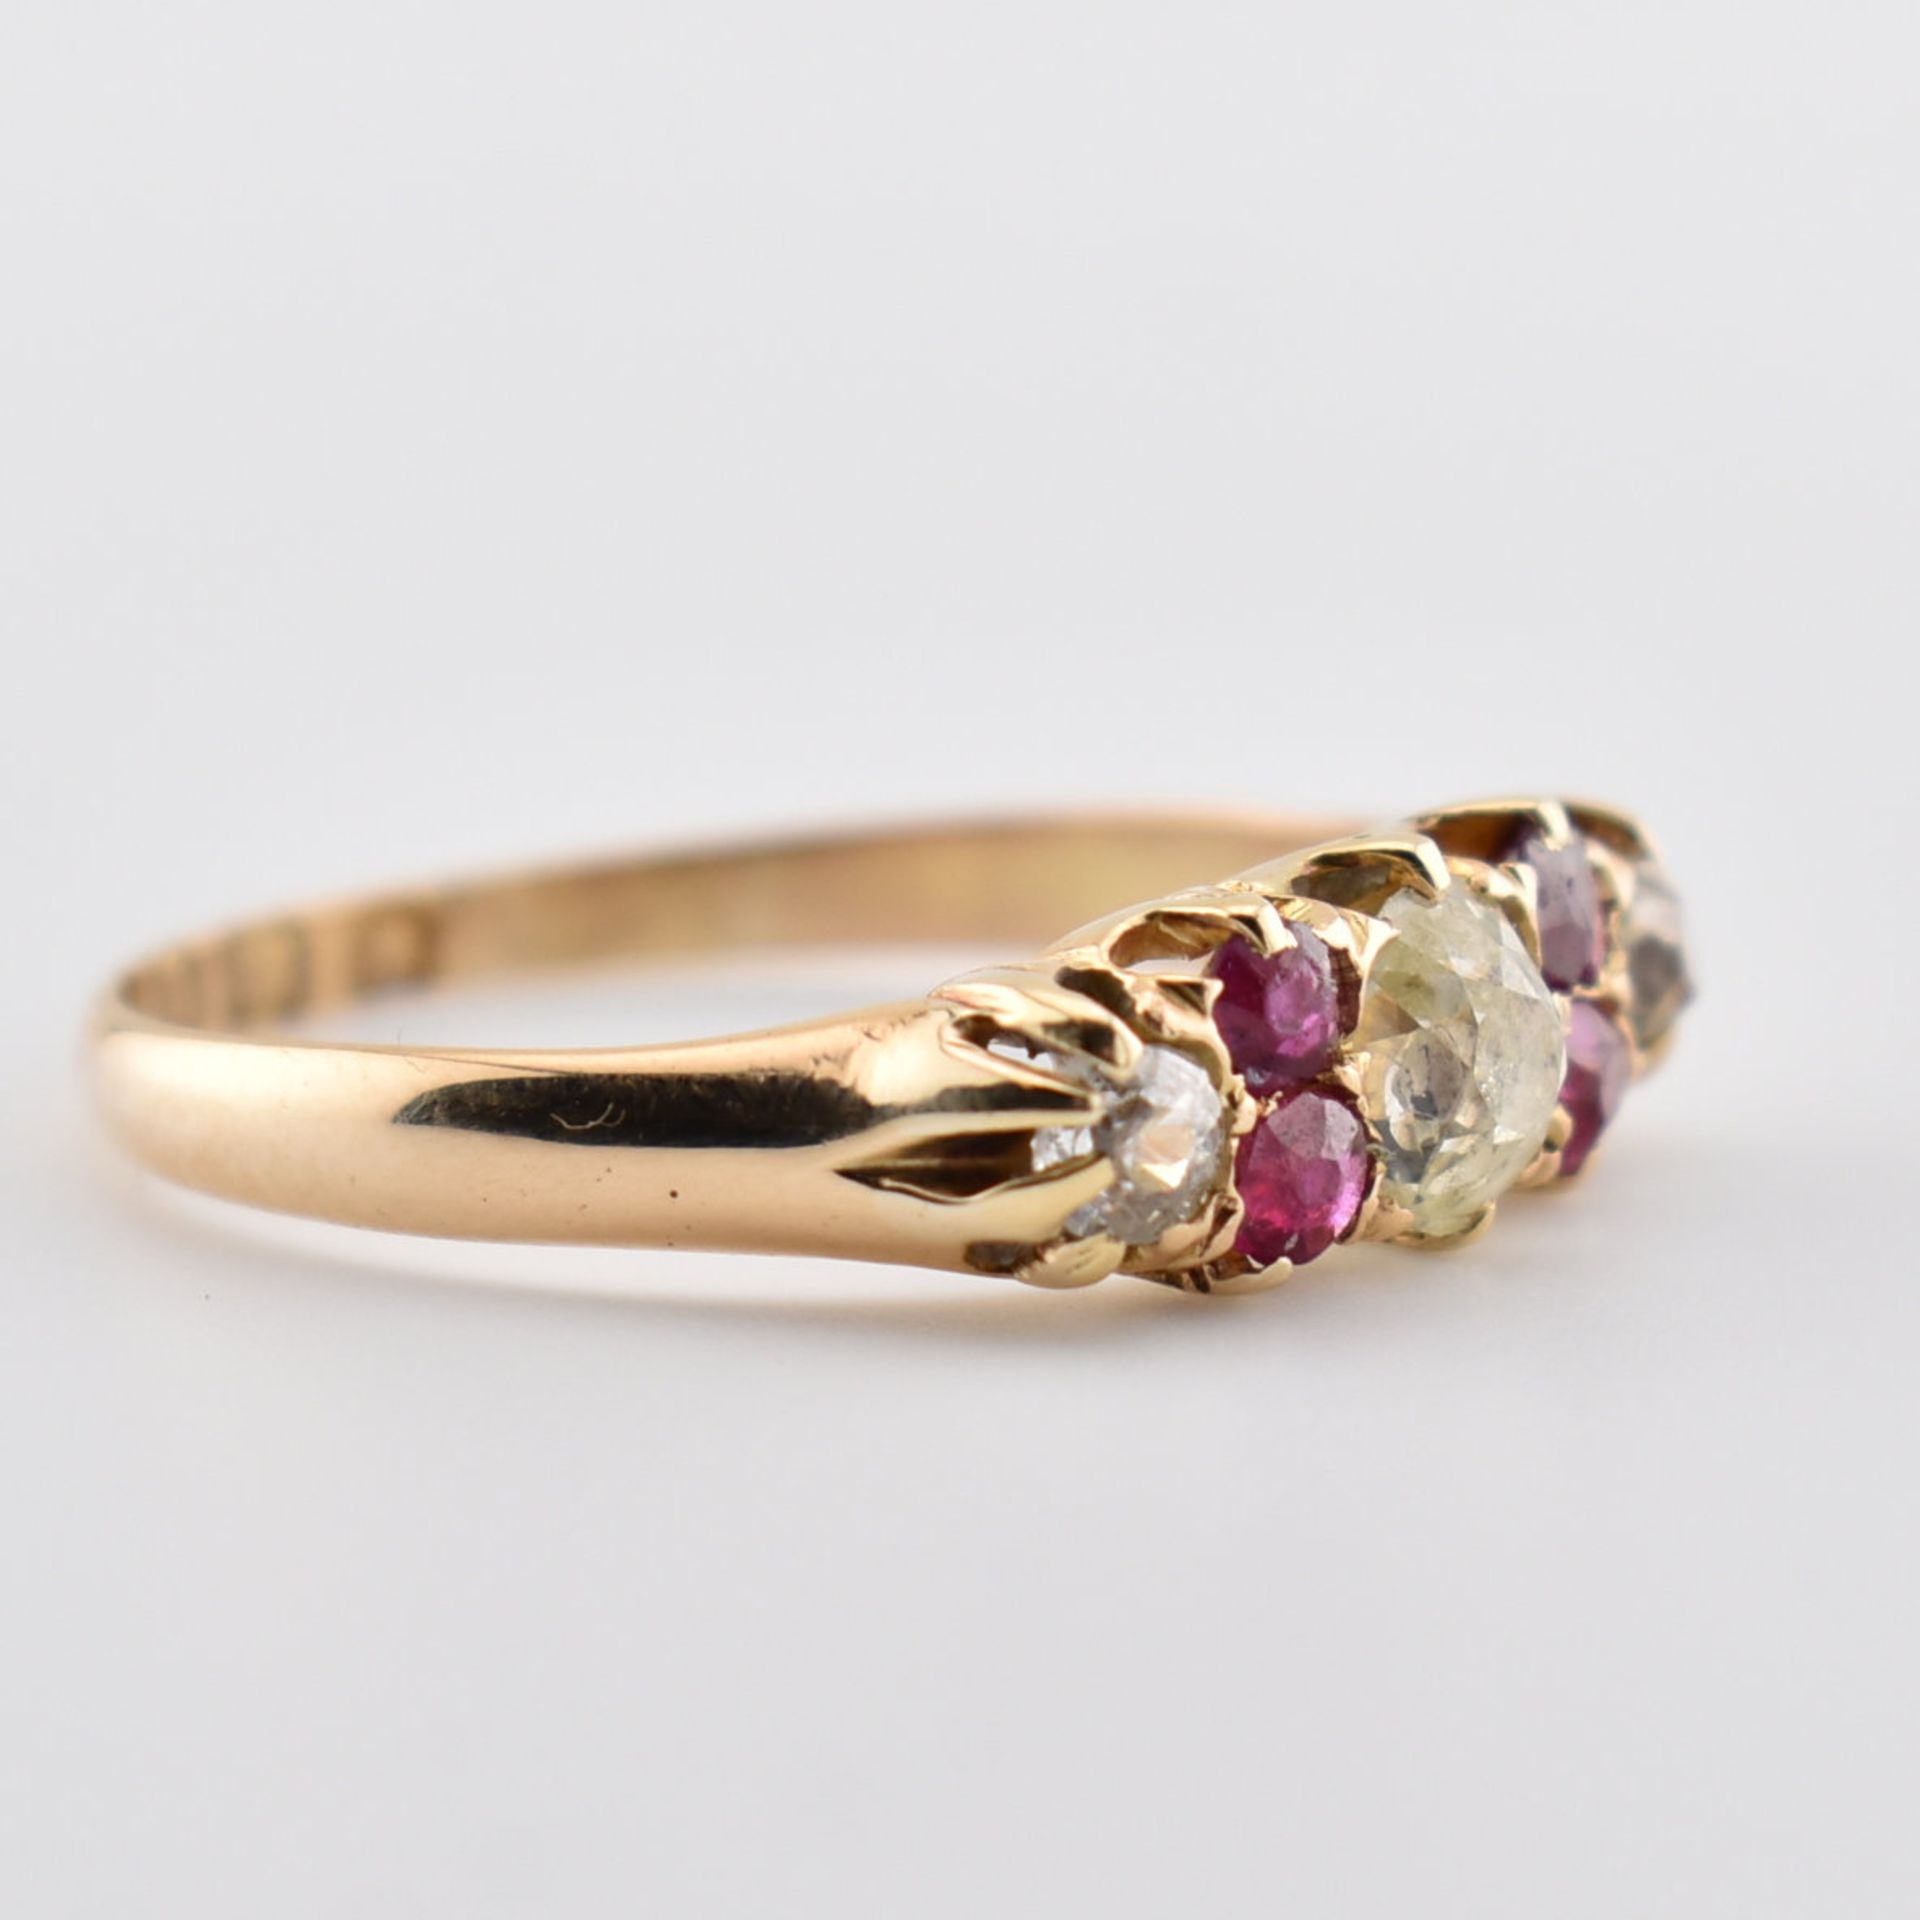 VICTORIAN HALLMARKED 18CT GOLD DIAMOND & RED STONE RING - Image 3 of 7